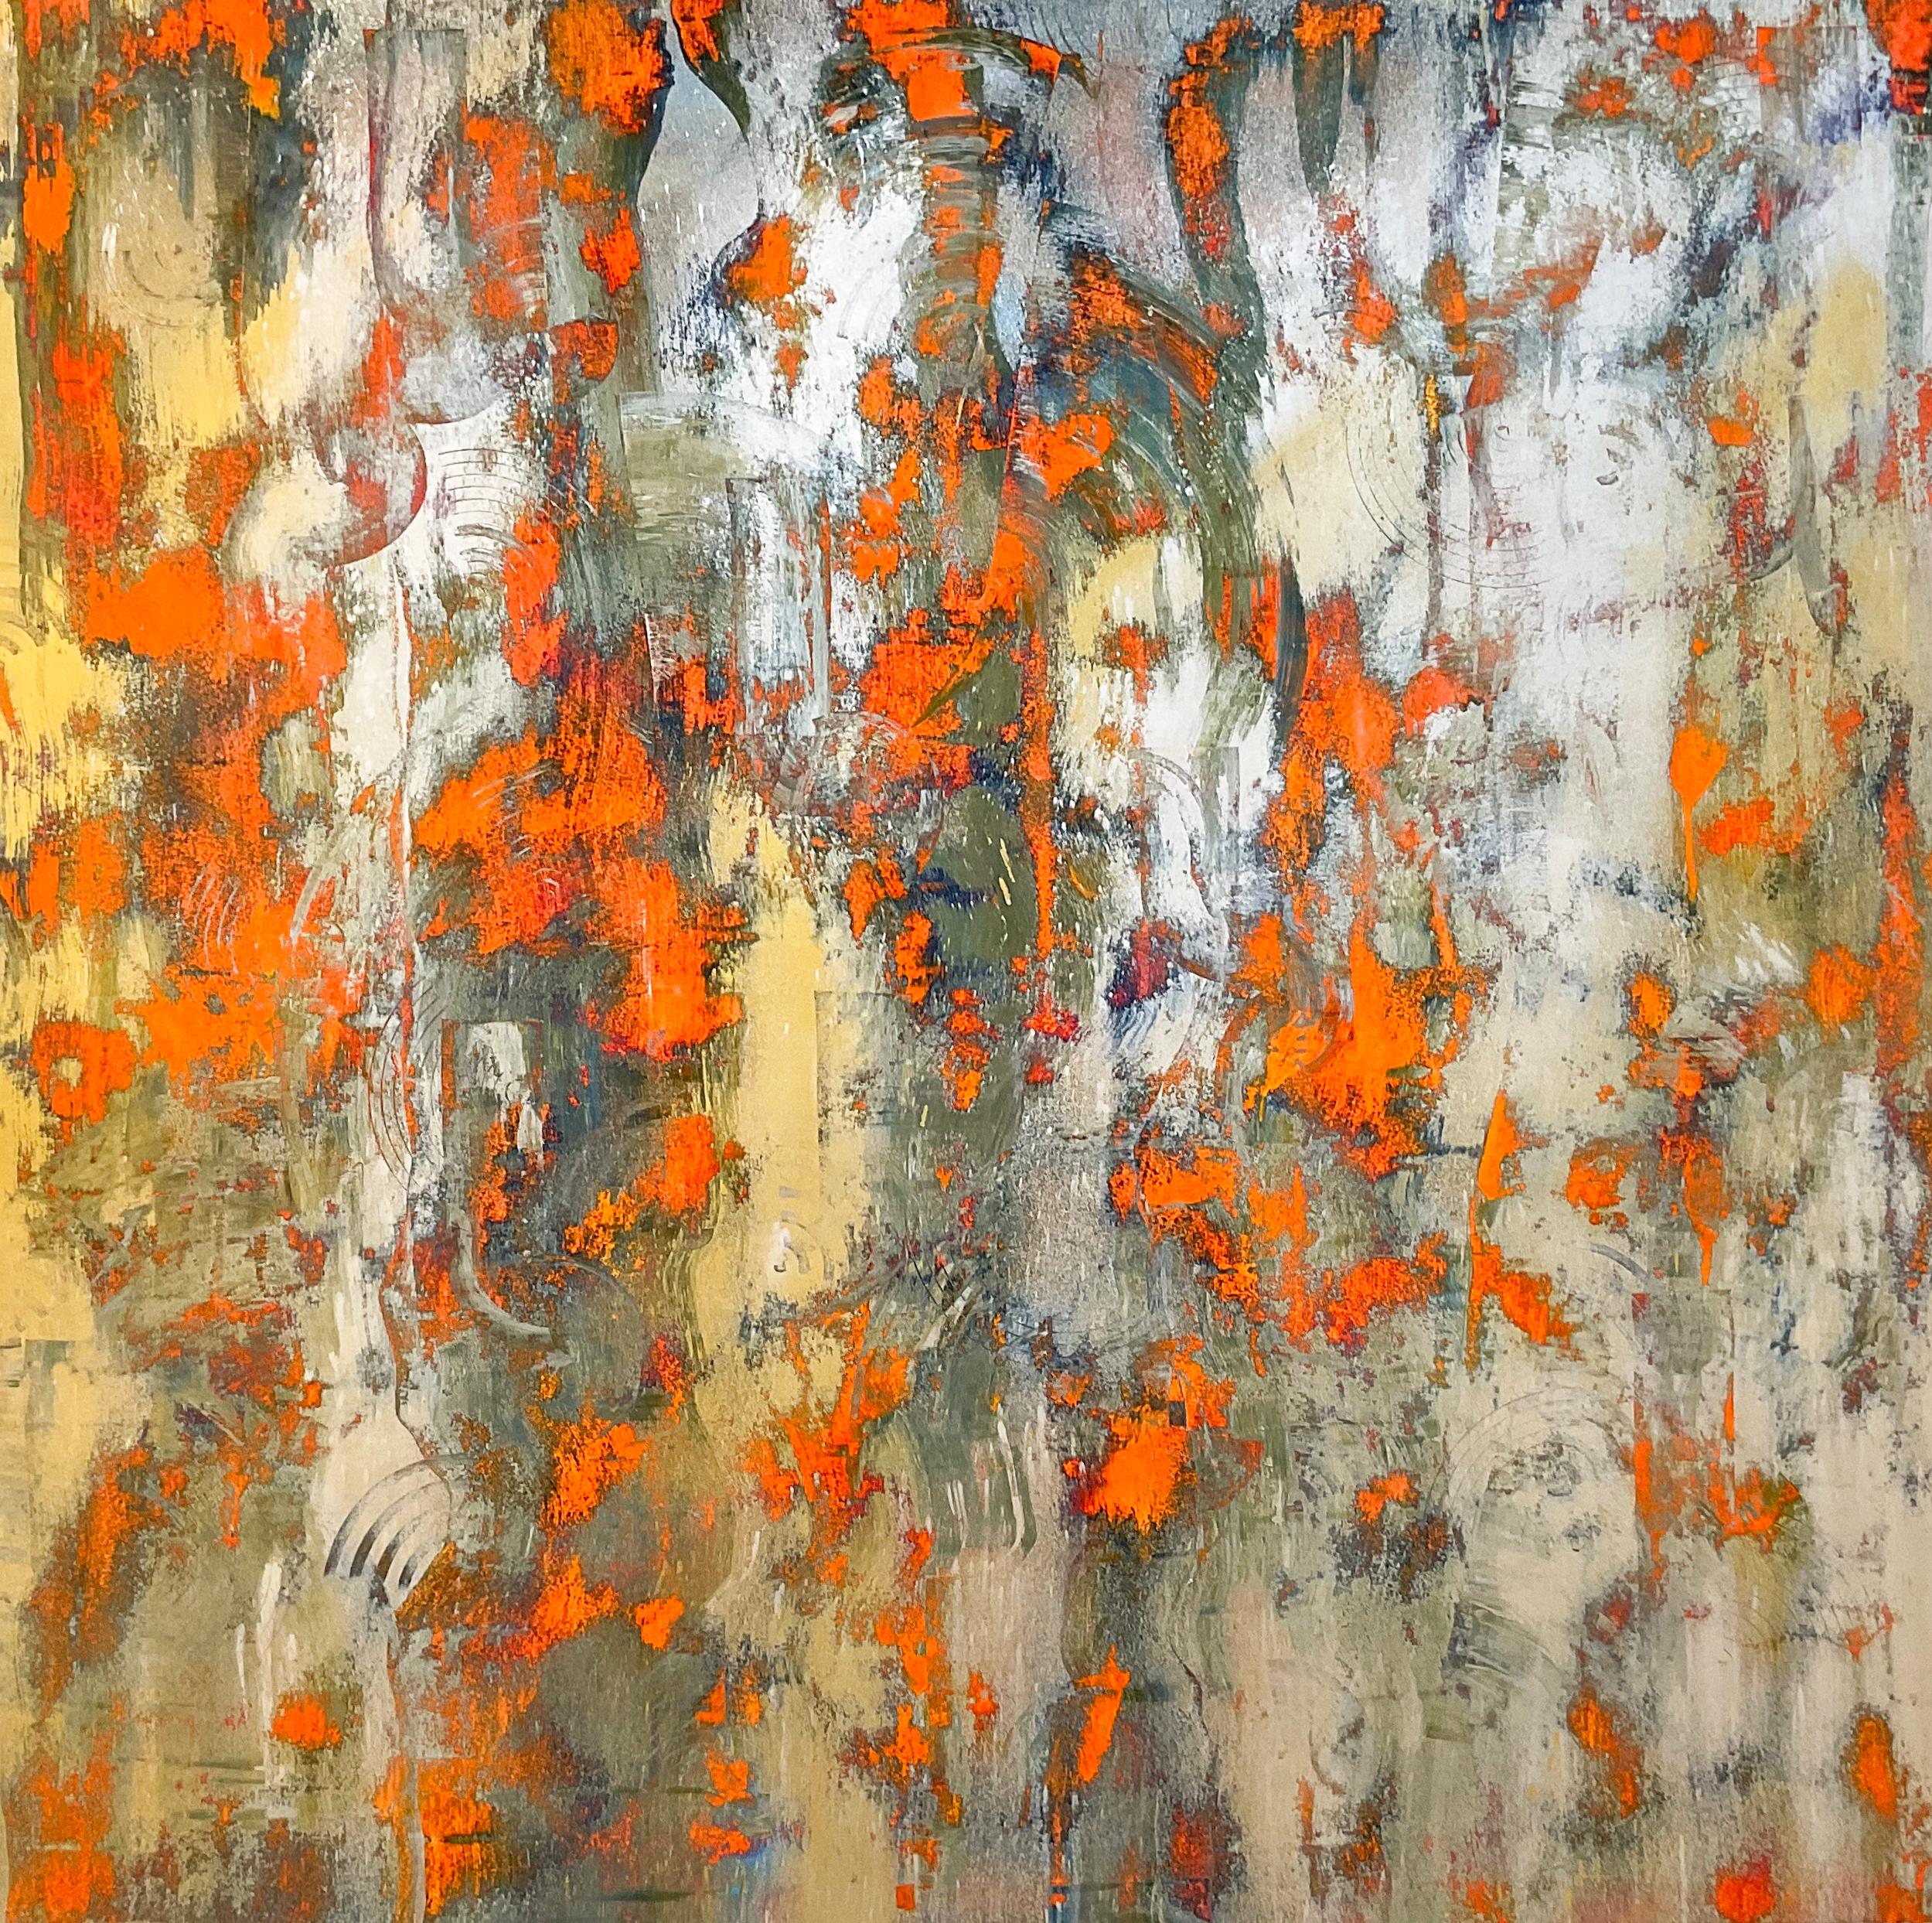 Abstract Painting Bruce Murphy - Sans titre Orange Silver and Gold : Peinture expressionniste abstraite